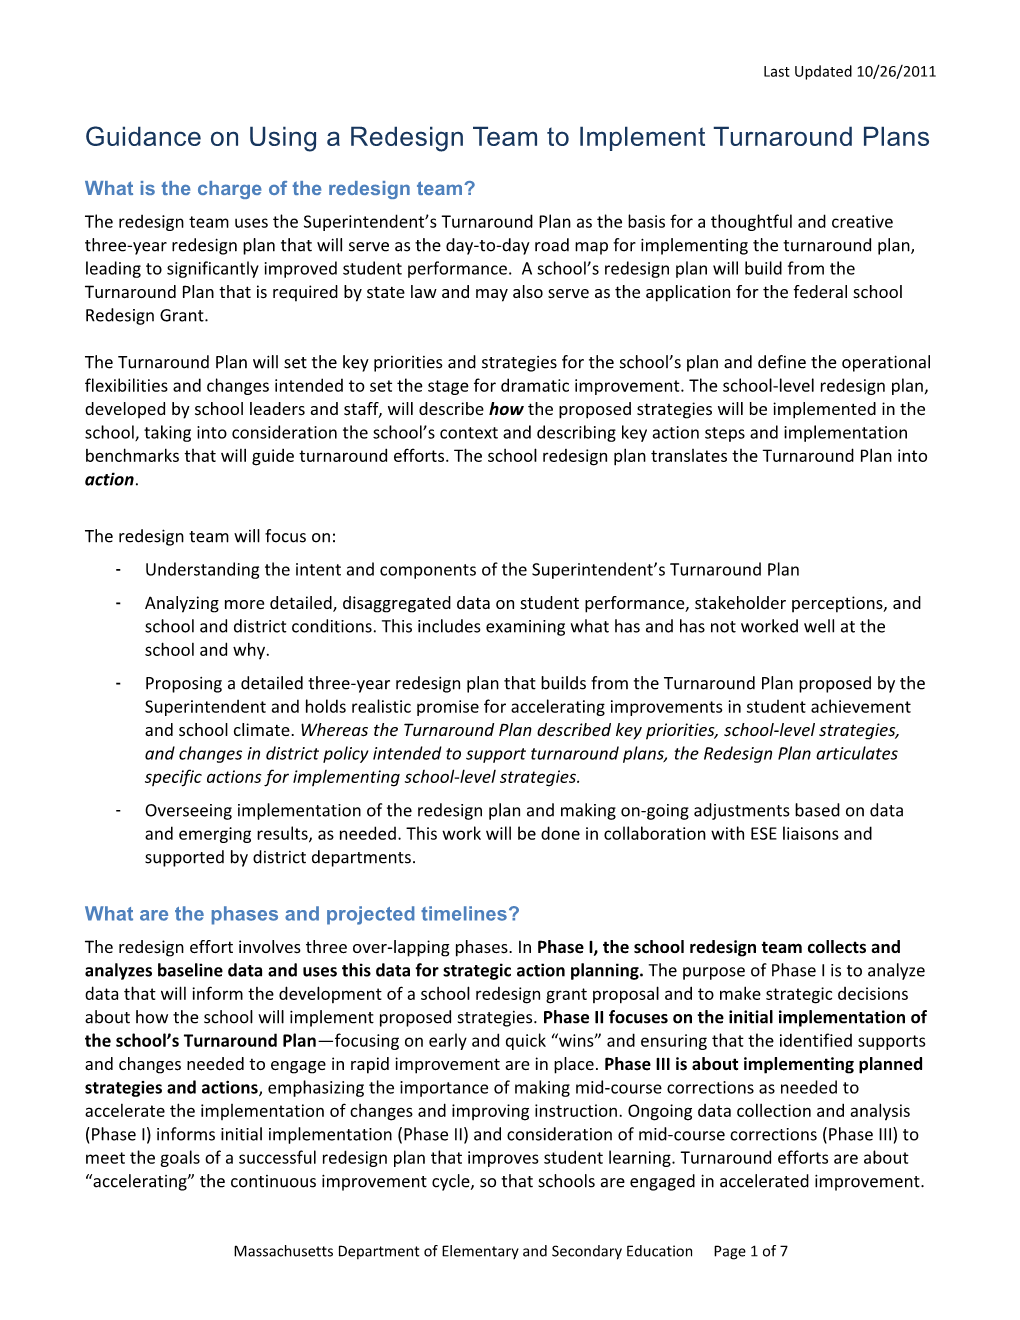 Guidance on Using a Redesign Team to Implement Turnaround Plans